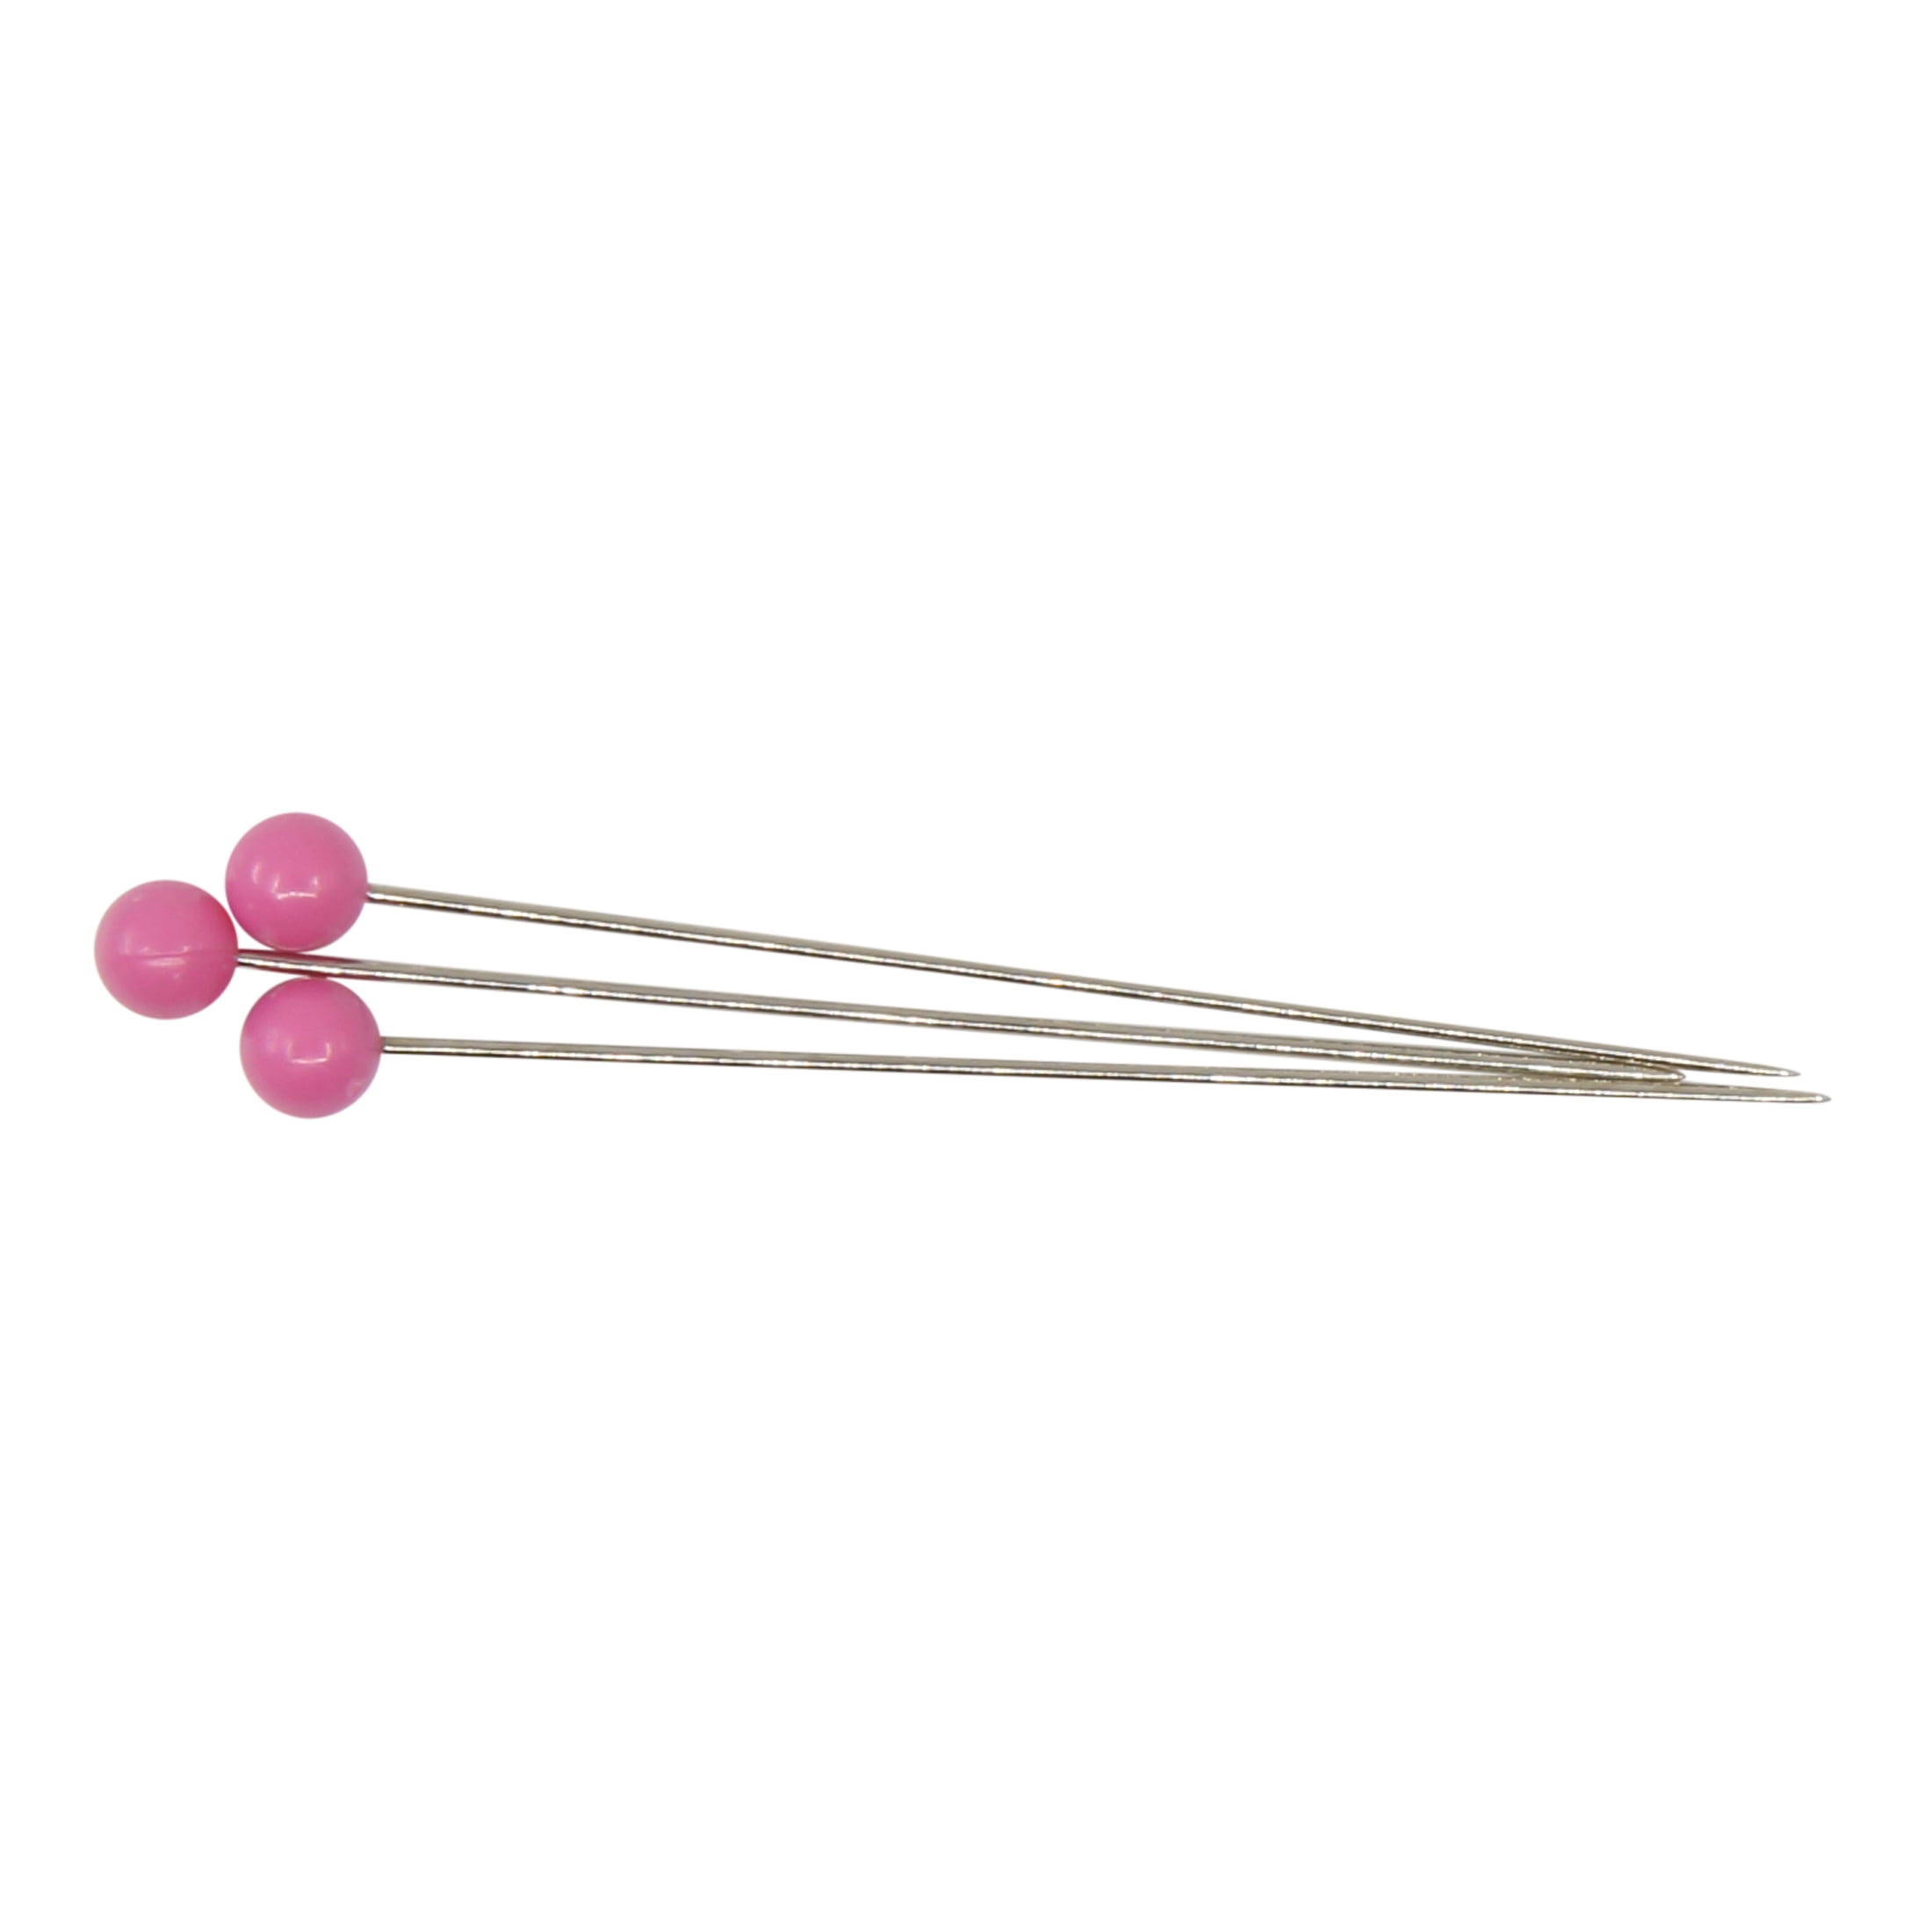 Dritz Quilter's White Ball Head Straight Pins-Size 1 1/2 long by Manhattan  Wardrobe Supply